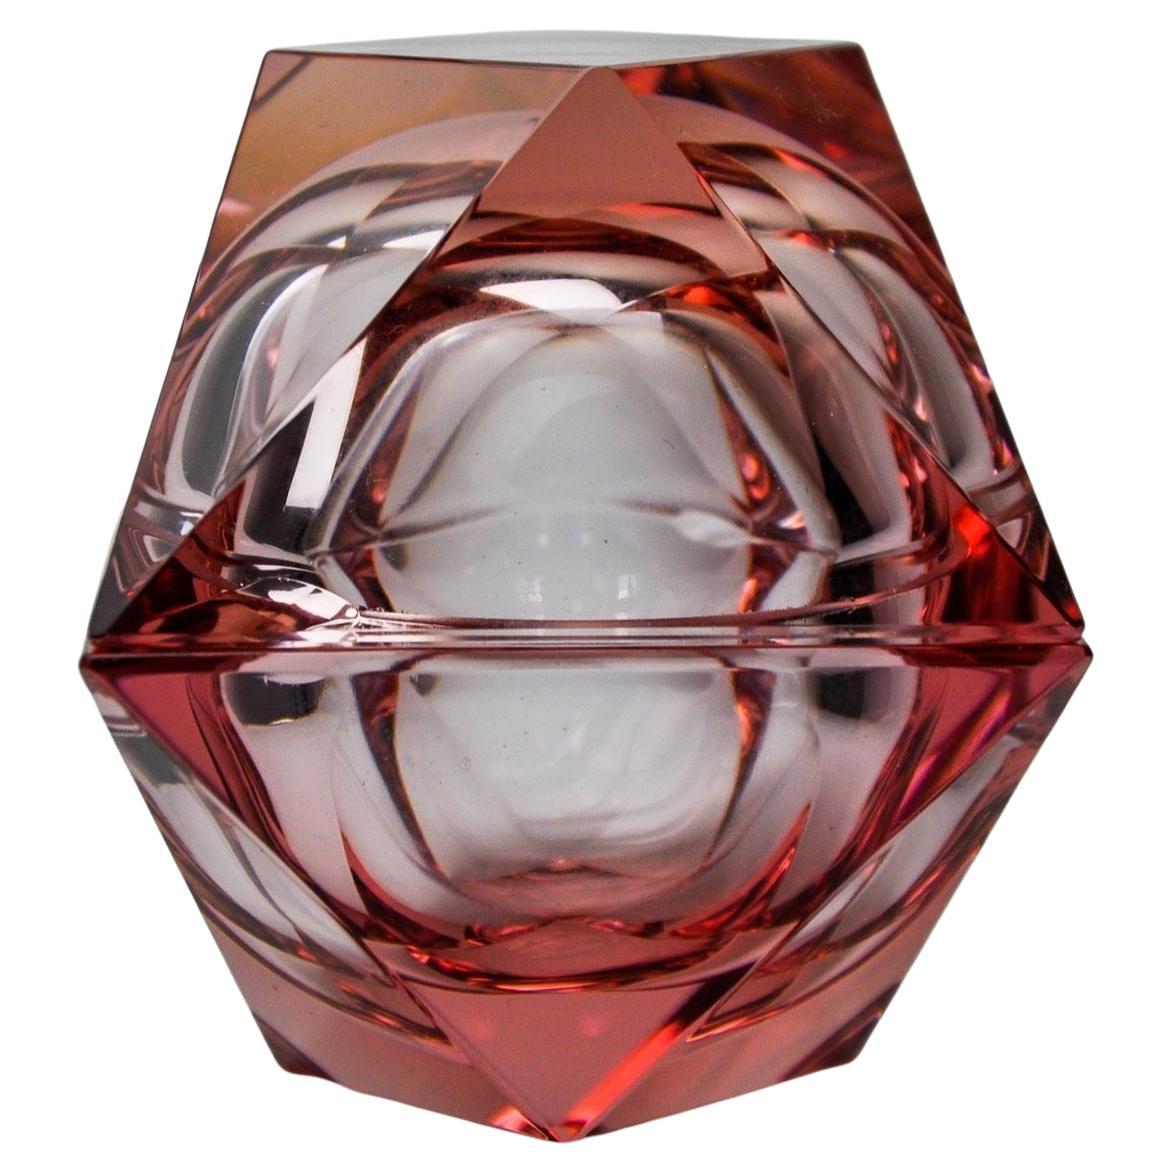 Rare pink faceted ashtray designed and manufactured for Seguso in Murano in the 1970s. Superb artisanal glass work by Venetian master glassmakers. Magnificent object of collection and decoration. Perfect state of conservation without missing or